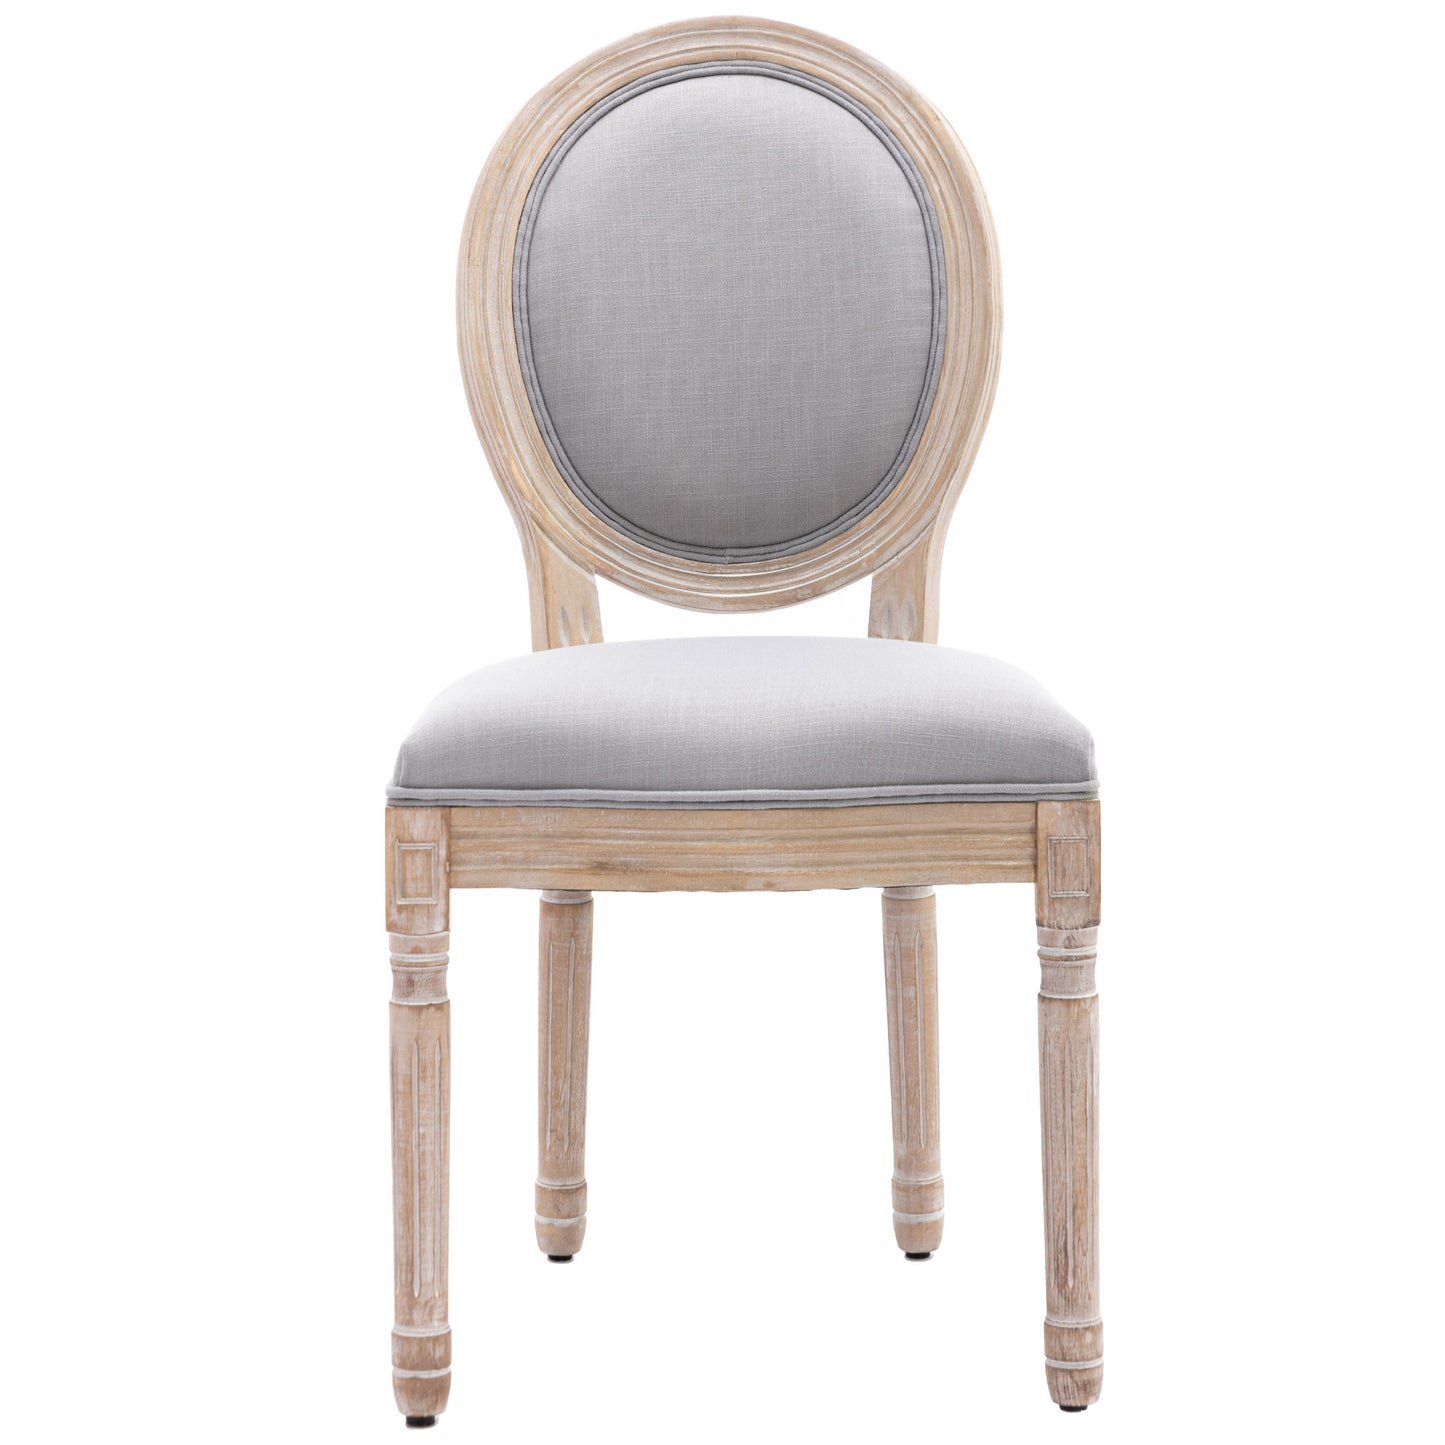 SogesPower Upholstered Fabrice French Dining Chair with rubber legs,Set of 2- Light Gray+Fabric